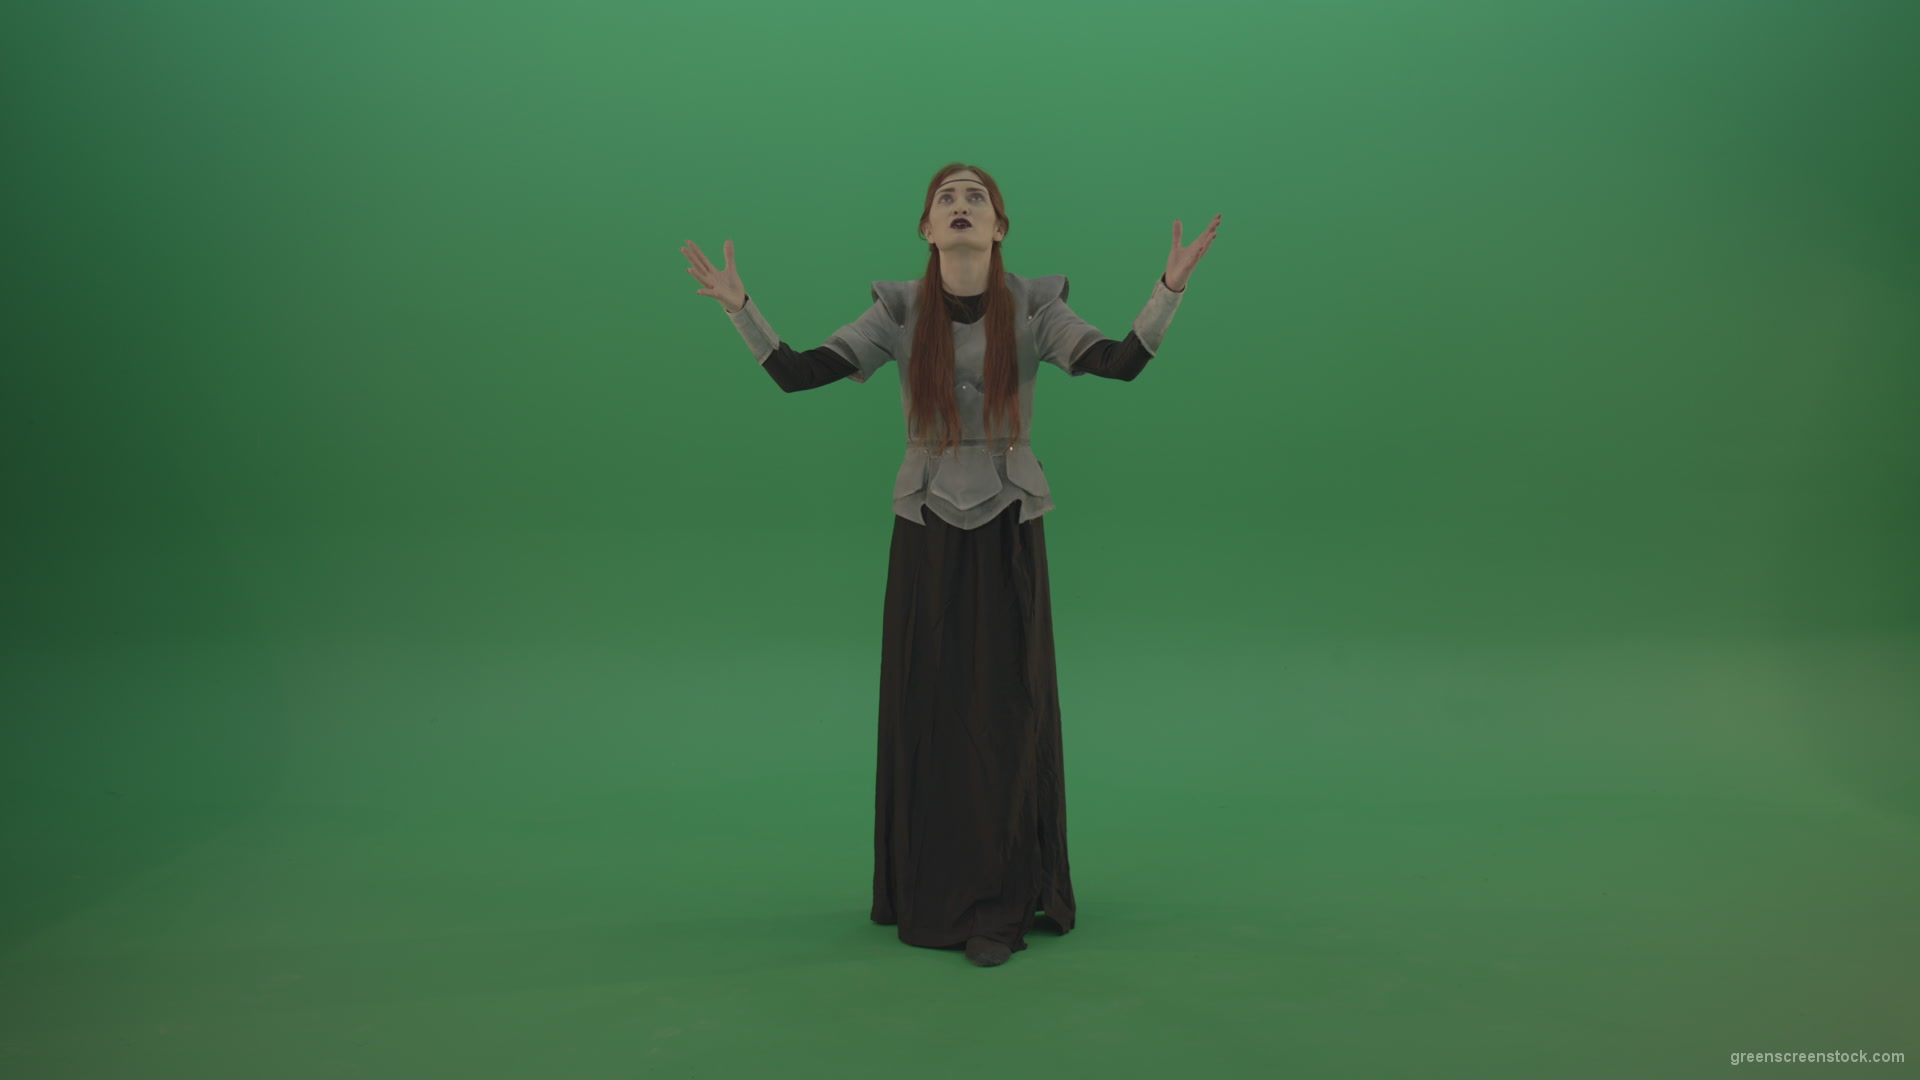 Redheaded-girl-in-full-height-in-medieval-warrior-clothing-asks-for-help-from-the-gods-on-green-screen_005 Green Screen Stock